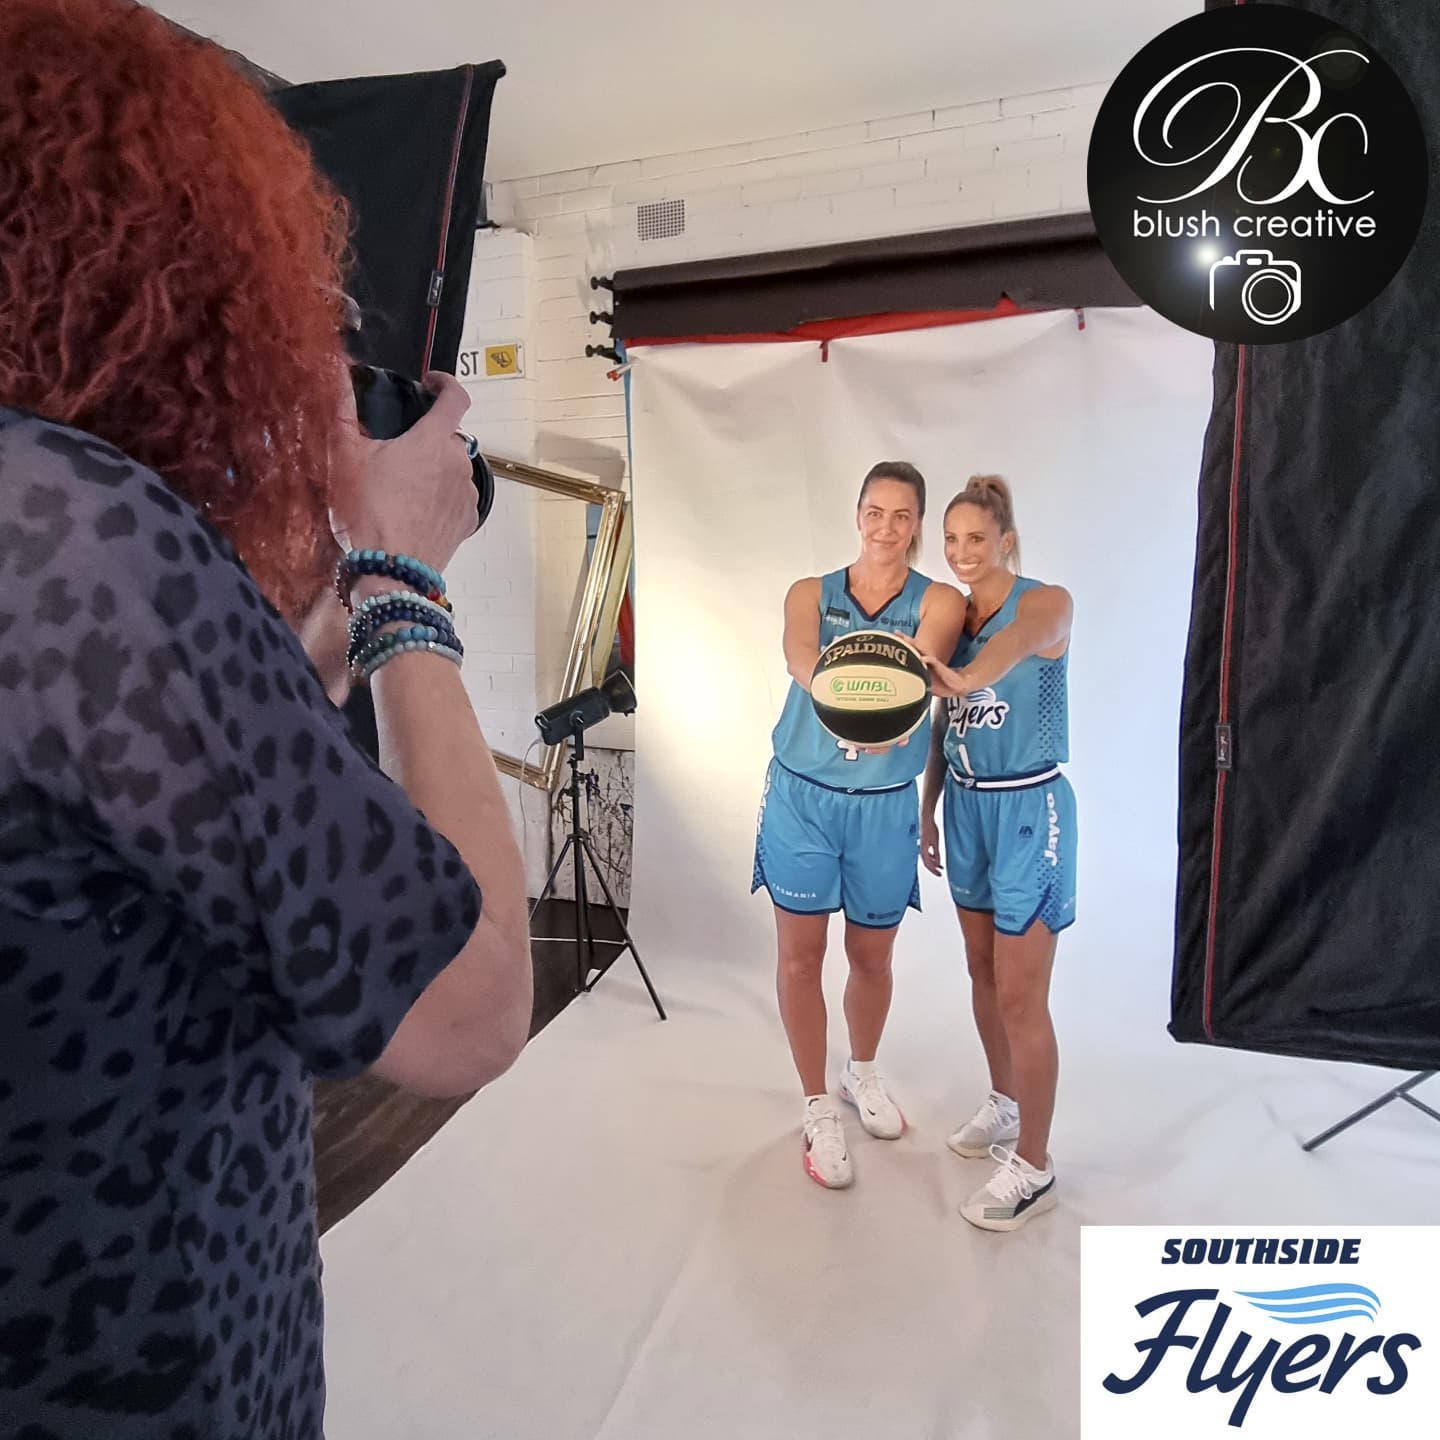 Melbourne professional photography for @athletes, teams and sporting associations #femalebasketball

#teamheadshots #photography #photoshoot #photographer #professionalphotographer #Melbournephotographer

Behind the scenes at #southsideflyers elite female #basketball team's photo shoot for 2021. @blushcreativeau photos are for life size pull up banners to display at games and for the media. Good luck for your first game this Saturday girls, we will be cheering you all the way! #legends 🏀🏆👏 #wnbl #watchussoar #femalebasketball #BTS #behindthescenes

Photo shoot inquiries info@blush.com.au
or call (03) 9826 8655 .
Website www.blush.com.au

Shot on location at #studio_loft_photography

Hair and makeup by @lisarathgenmakeuphair